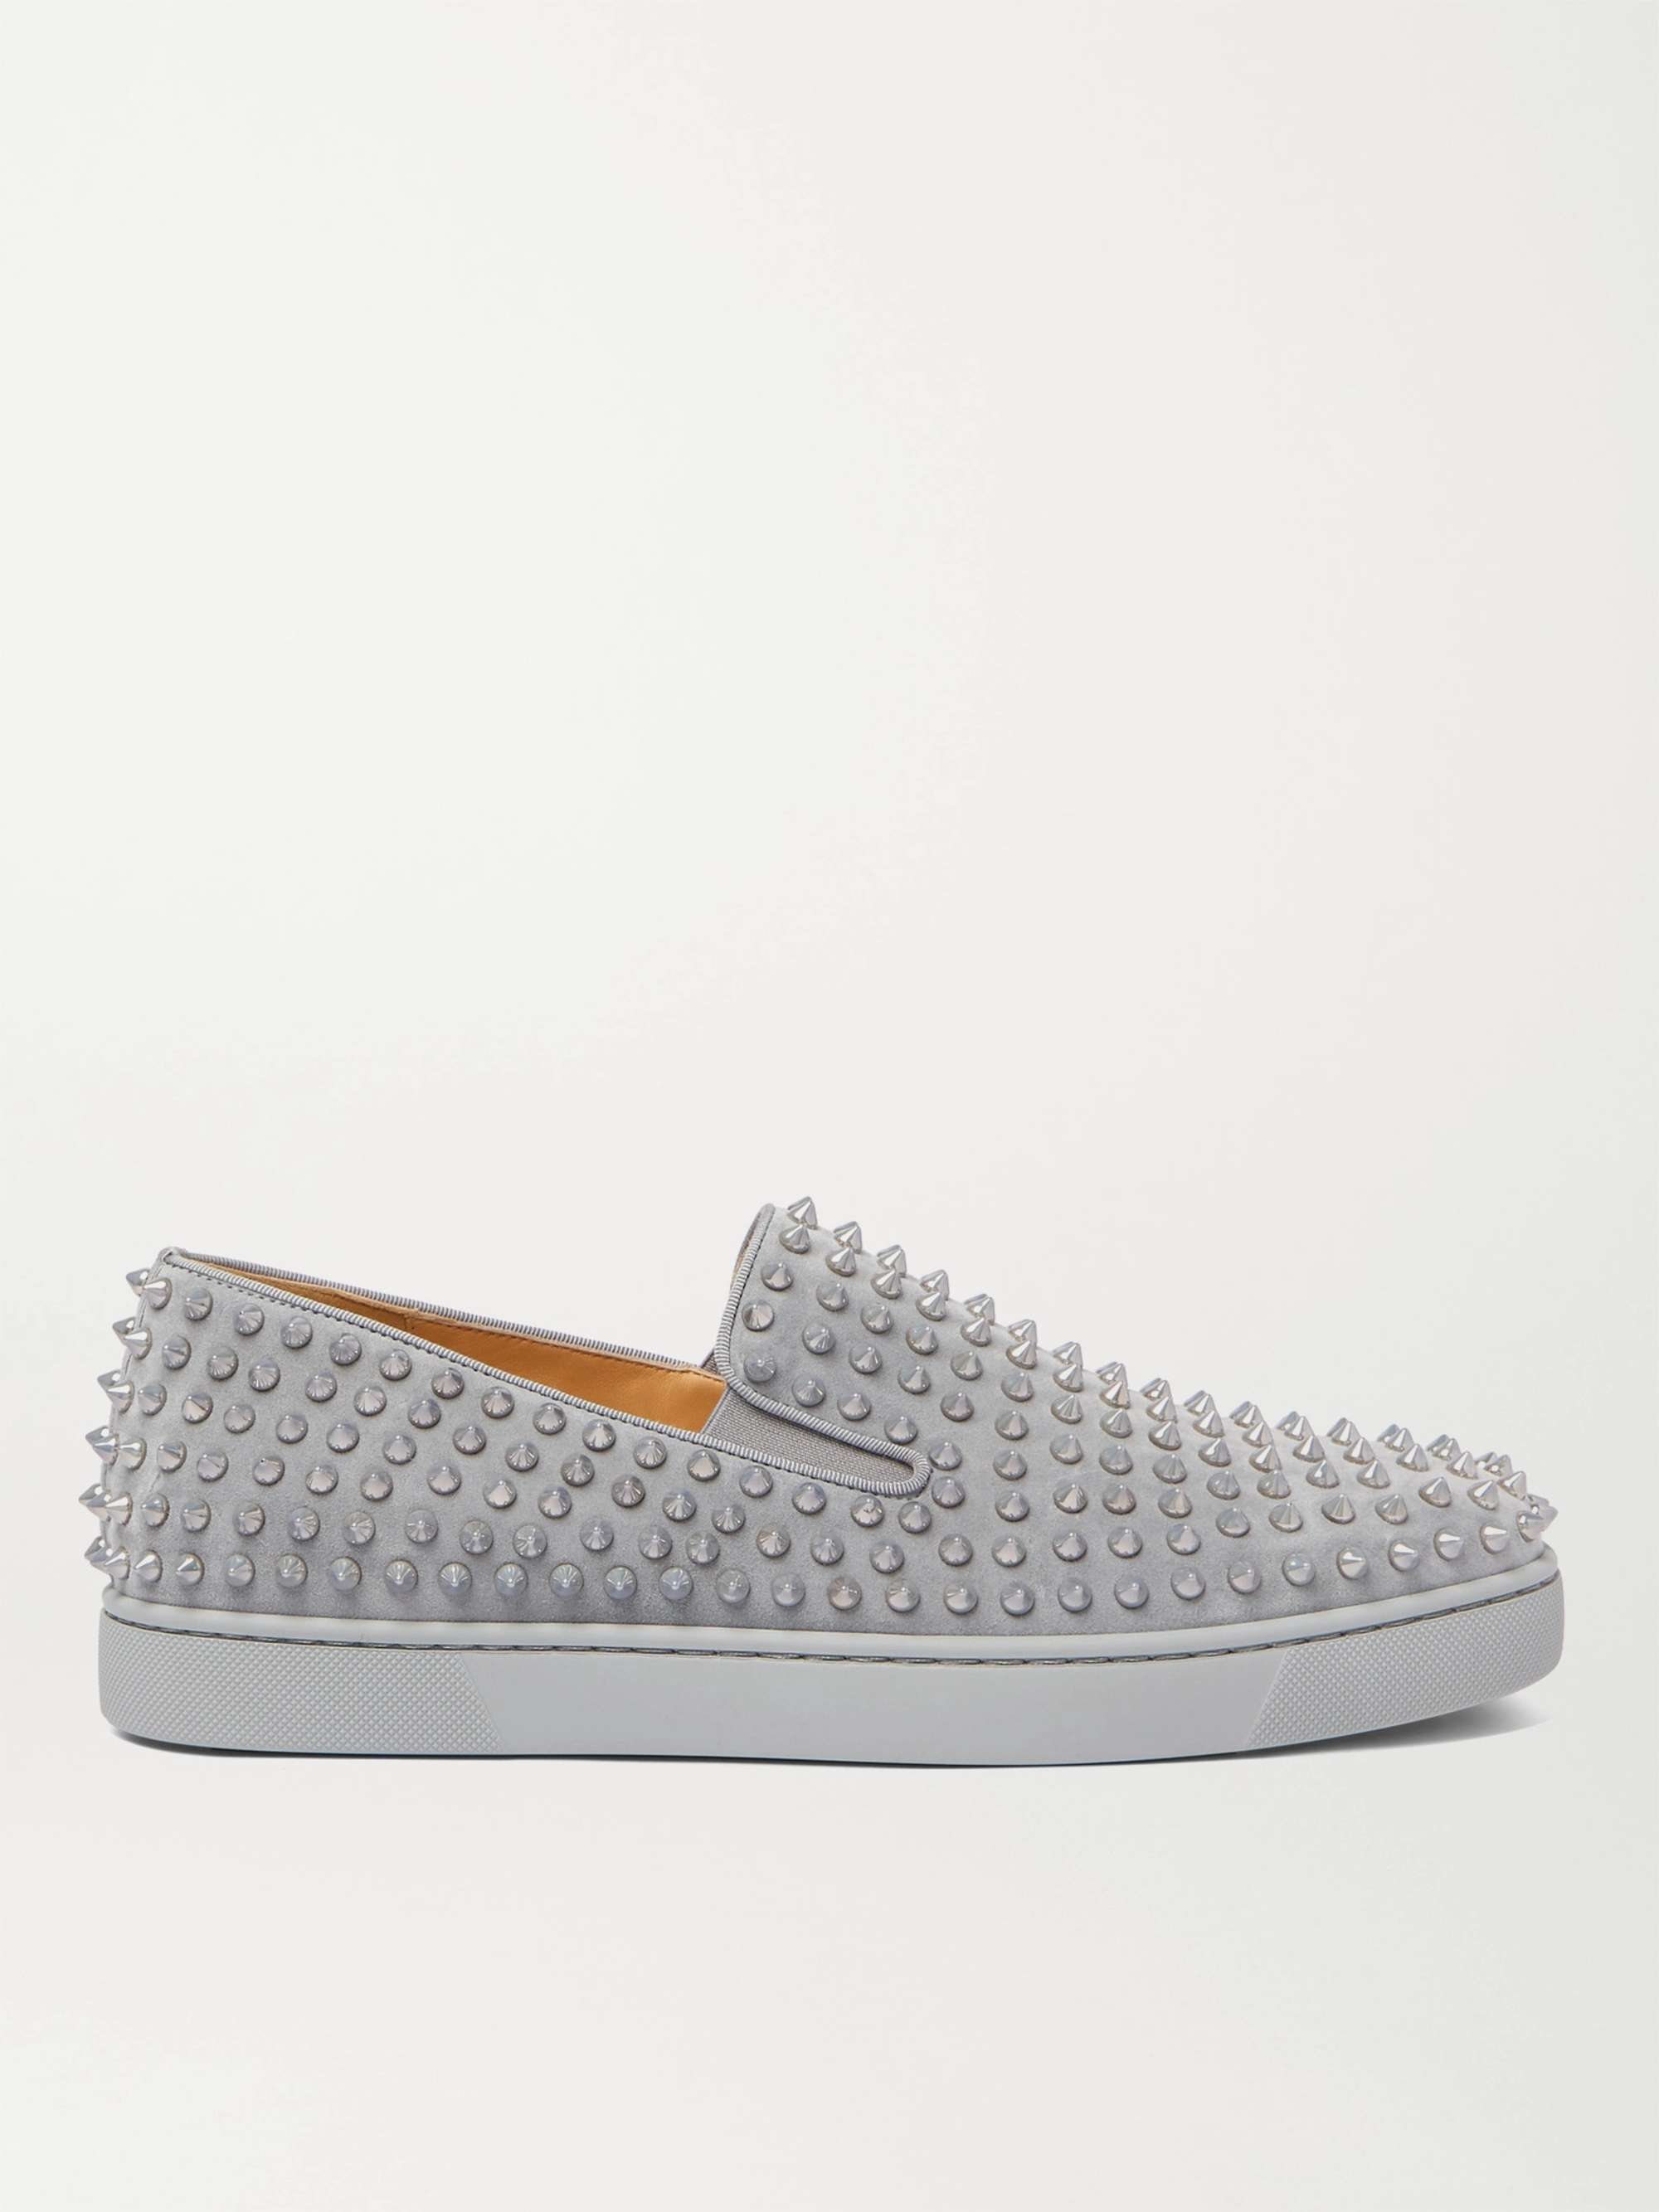 CHRISTIAN LOUBOUTIN Roller-Boat Spiked Suede Slip-On Sneakers | MR PORTER